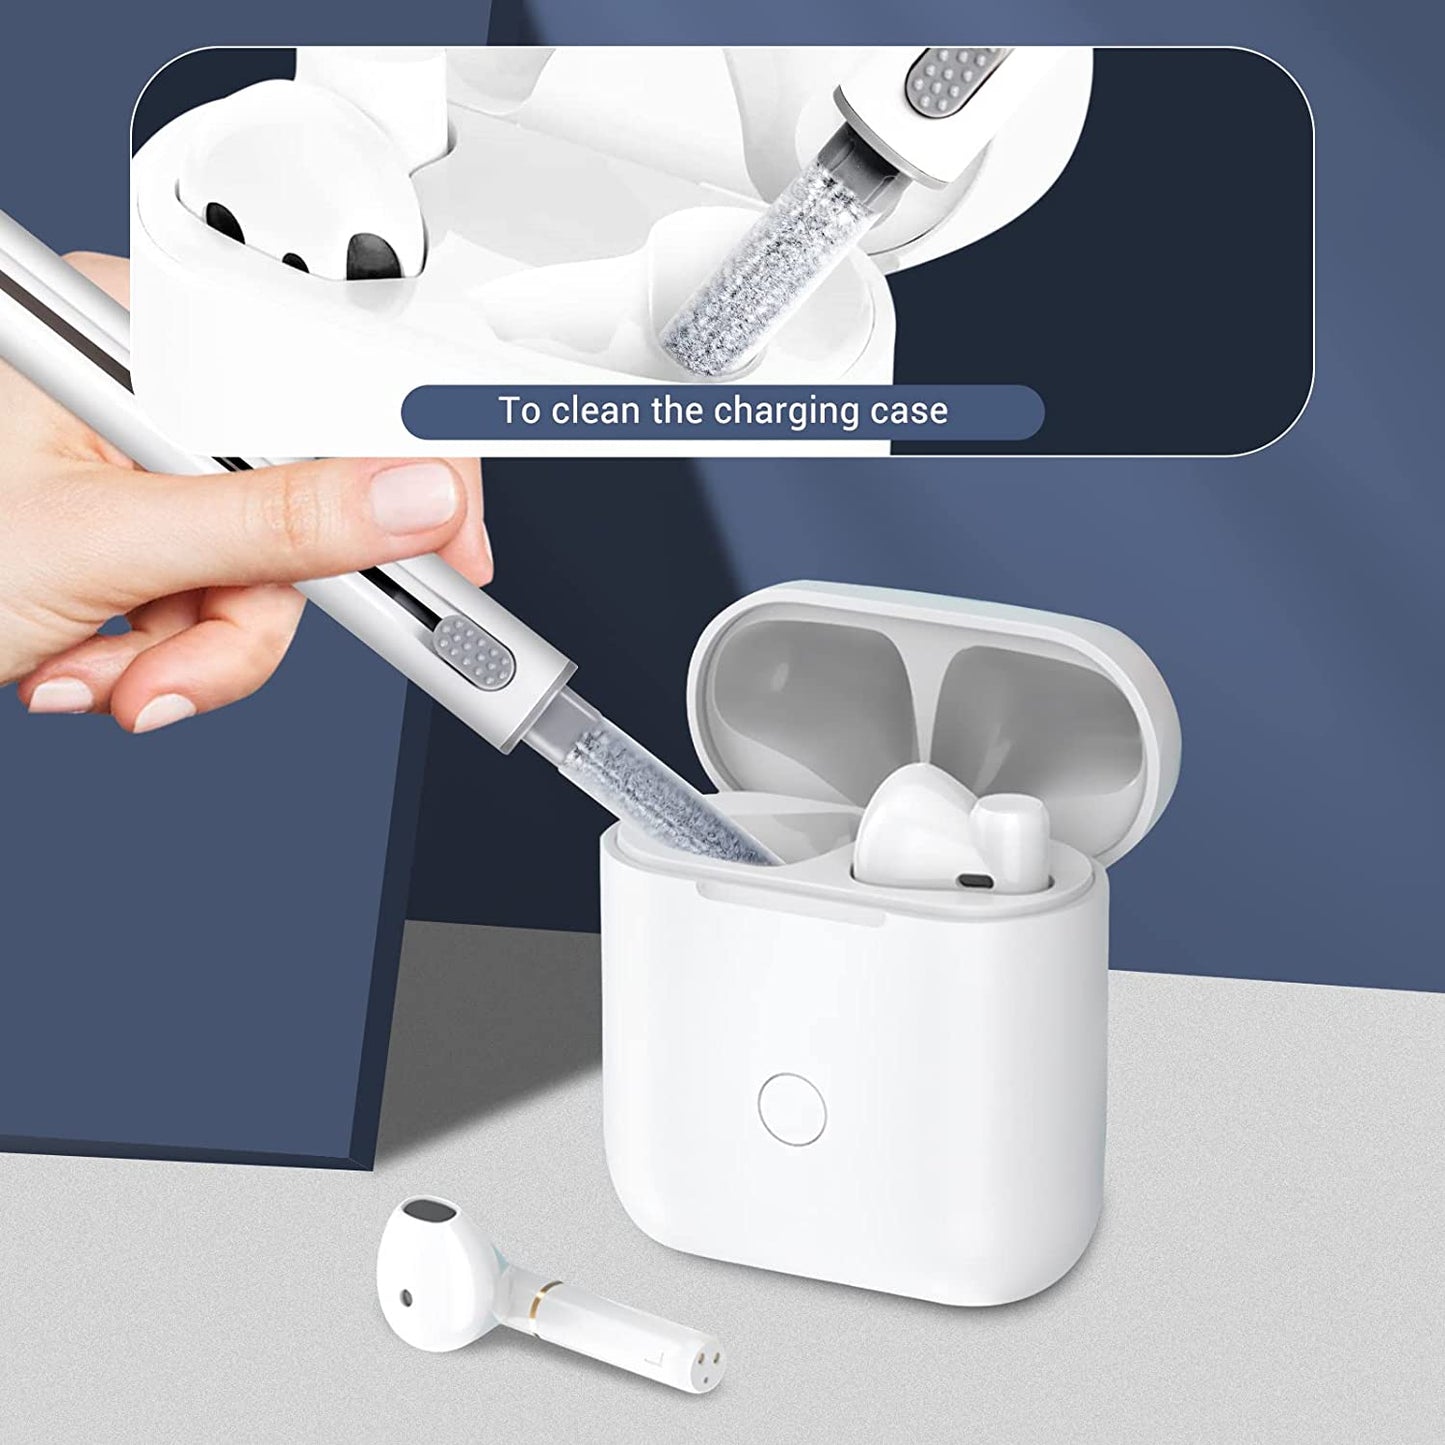 Introducing the 2023 New Cleaner Kit for AirPods Pro - Say goodbye to dust and dirt with our Multifunction Cleaning Pen! 🧹